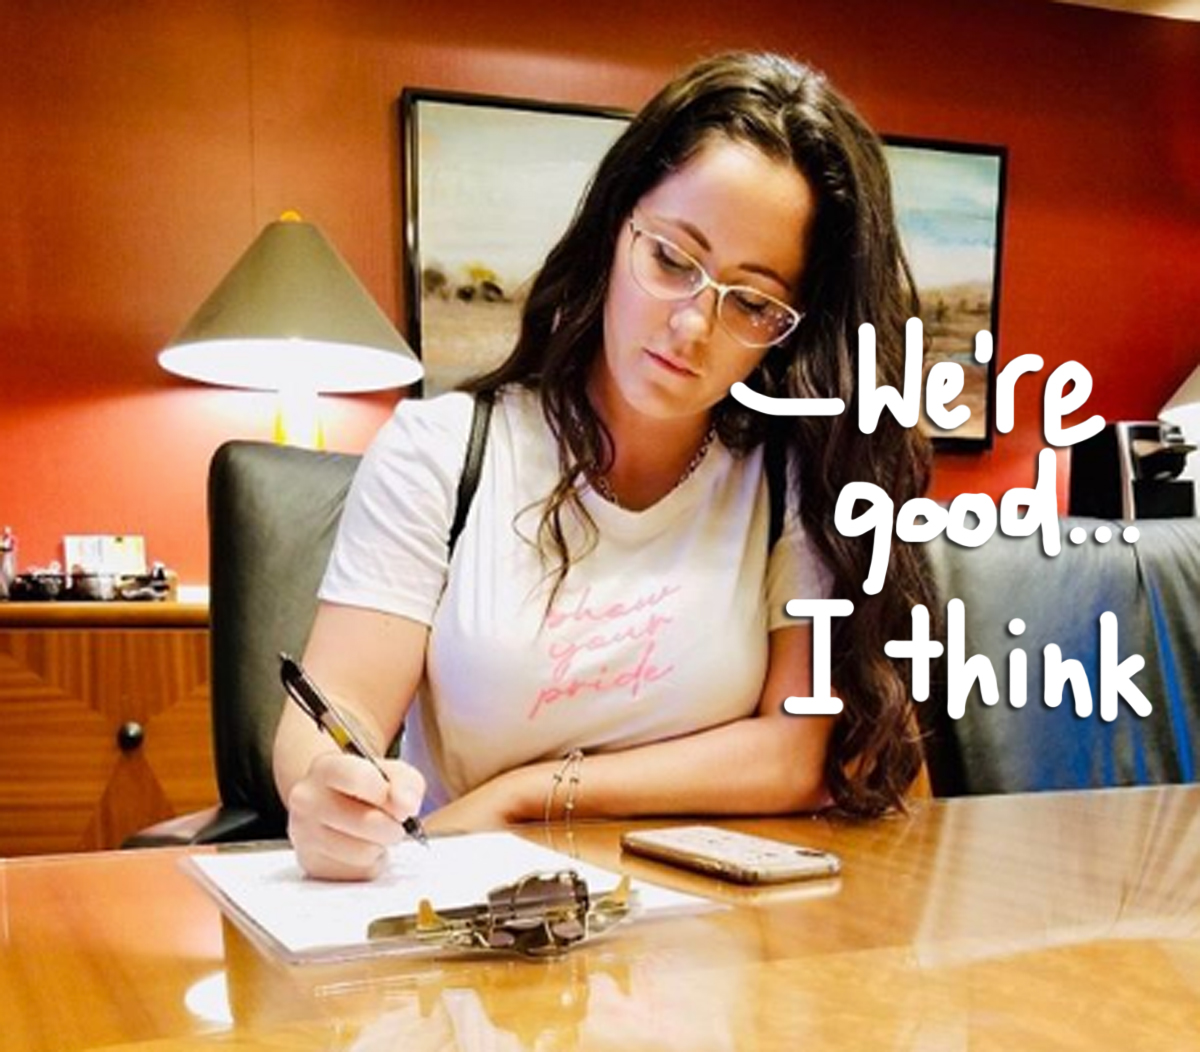 Jenelle Evans Claims She Was Not Fired From Teen Mom 2 After Mtv Said It Will No Longer Film